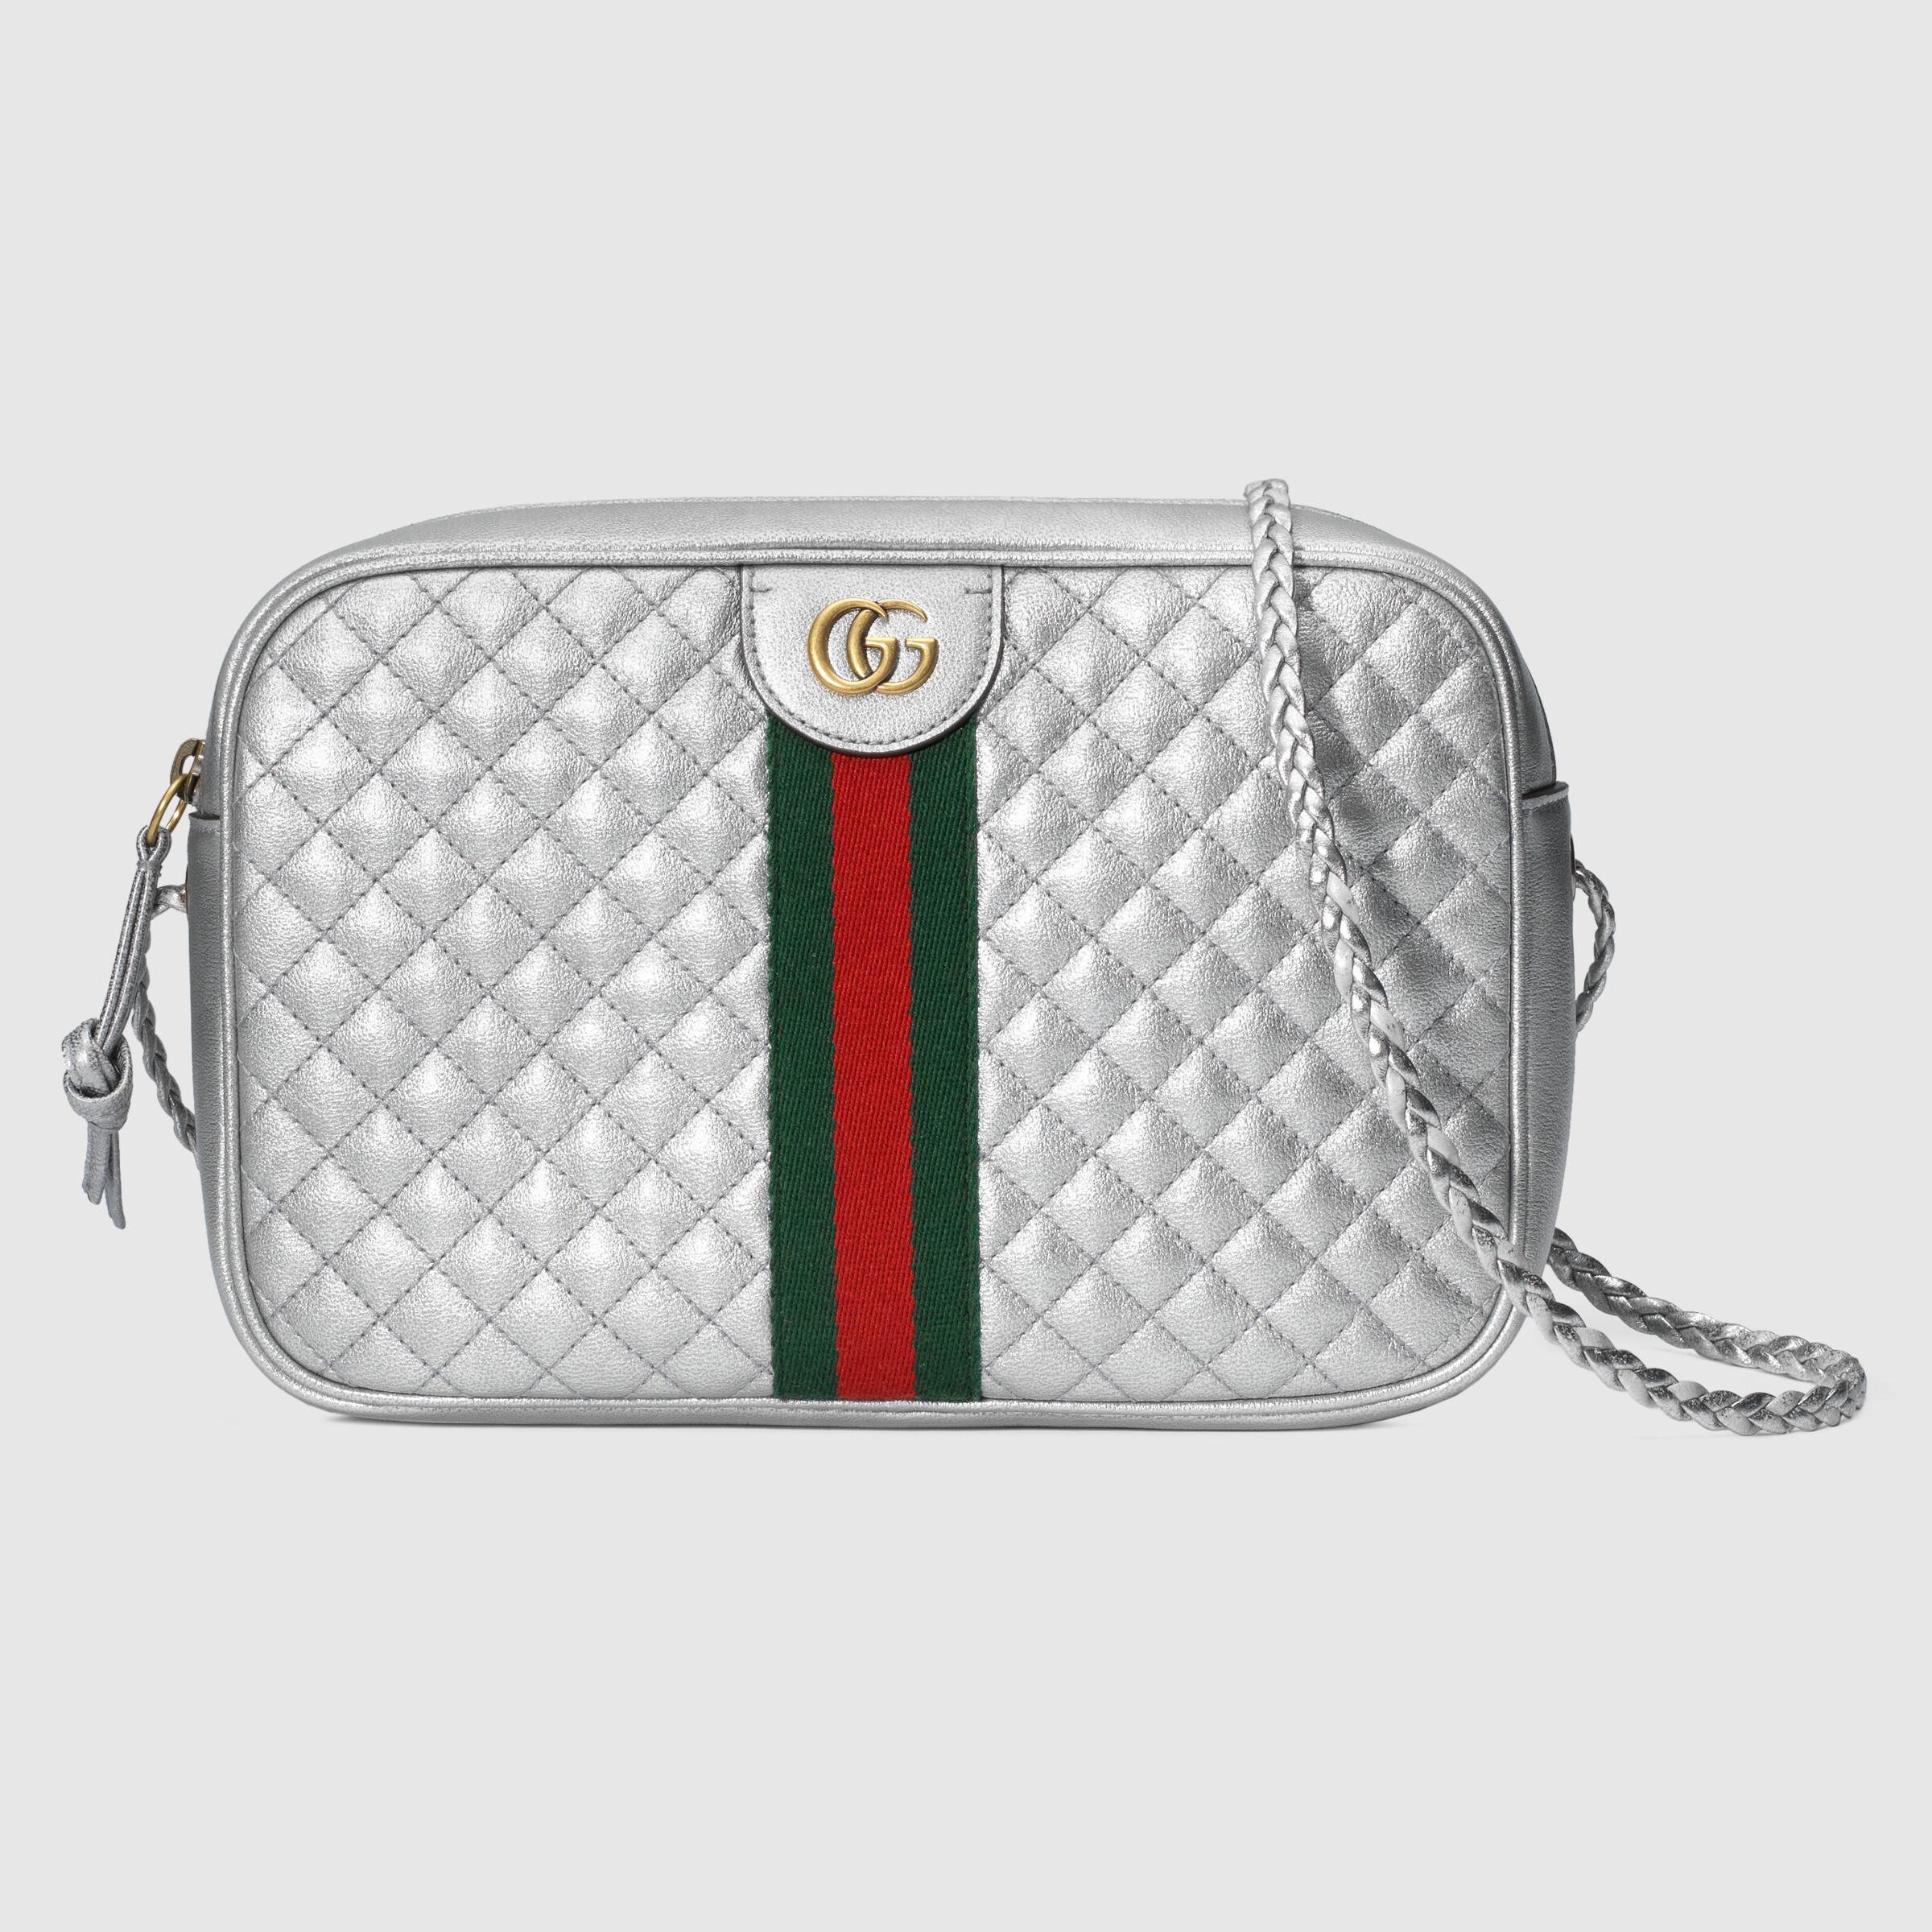 Cheap gucci bags for women Laminated handbags sale leather small gucci shoulder bag outlet ...